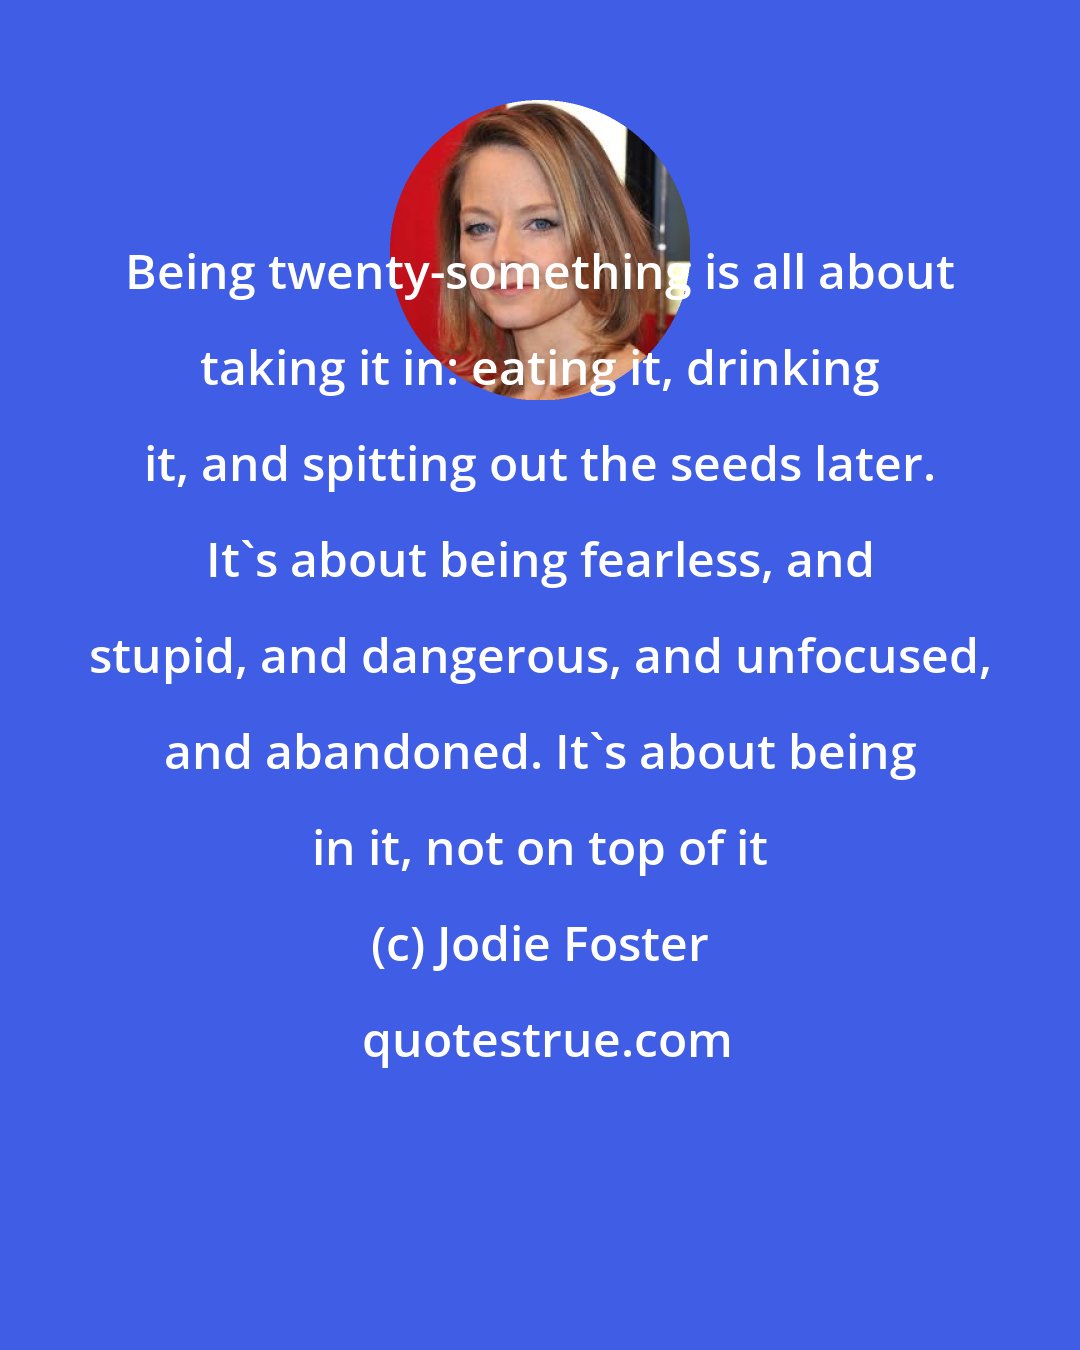 Jodie Foster: Being twenty-something is all about taking it in: eating it, drinking it, and spitting out the seeds later. It's about being fearless, and stupid, and dangerous, and unfocused, and abandoned. It's about being in it, not on top of it